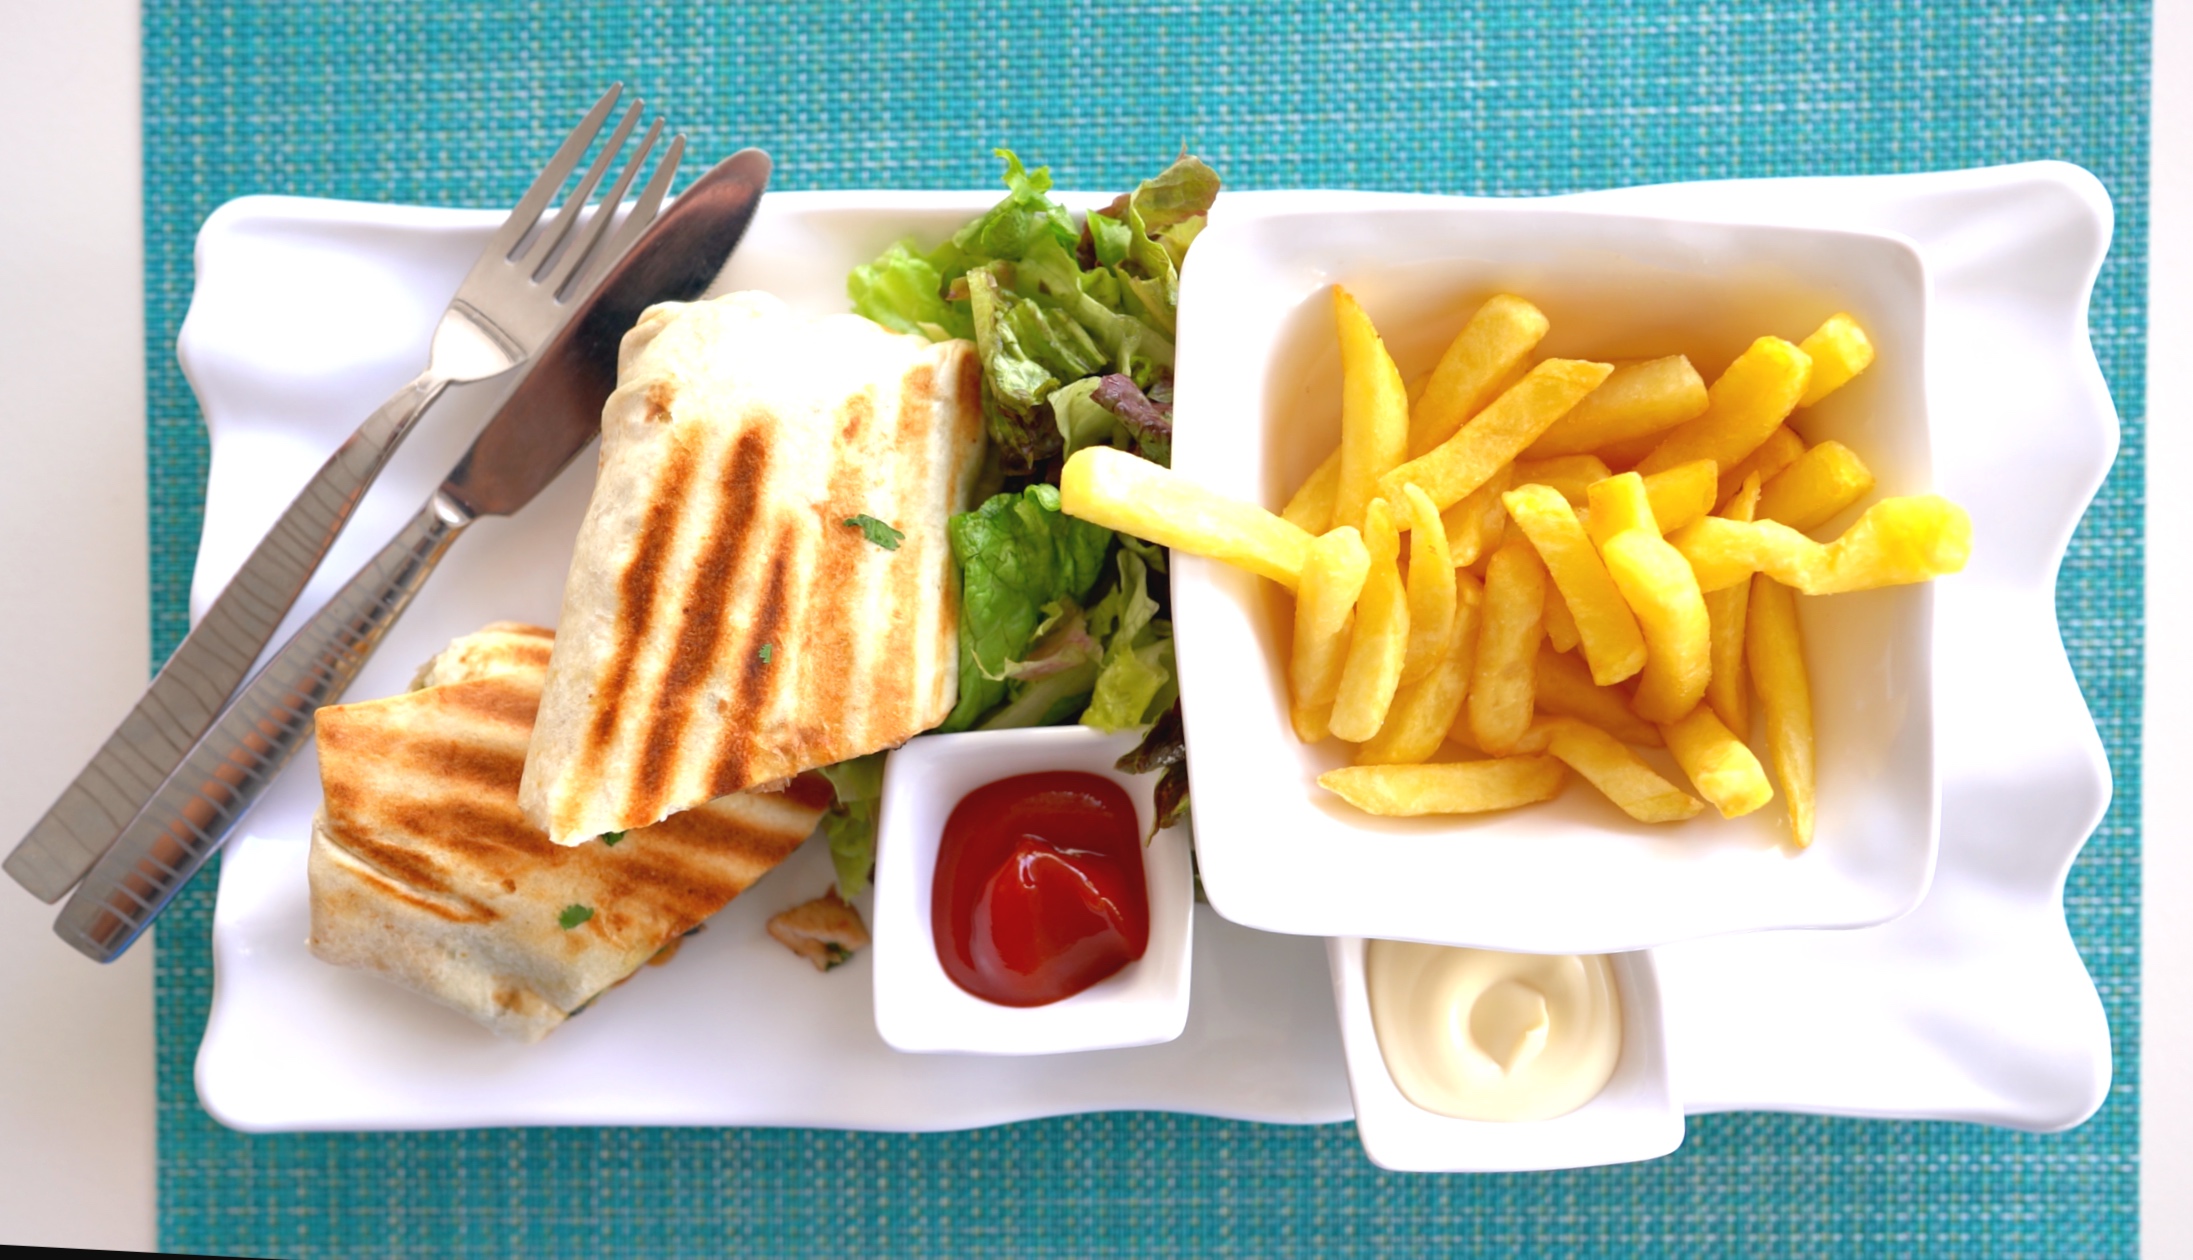  Wrap and fries.  